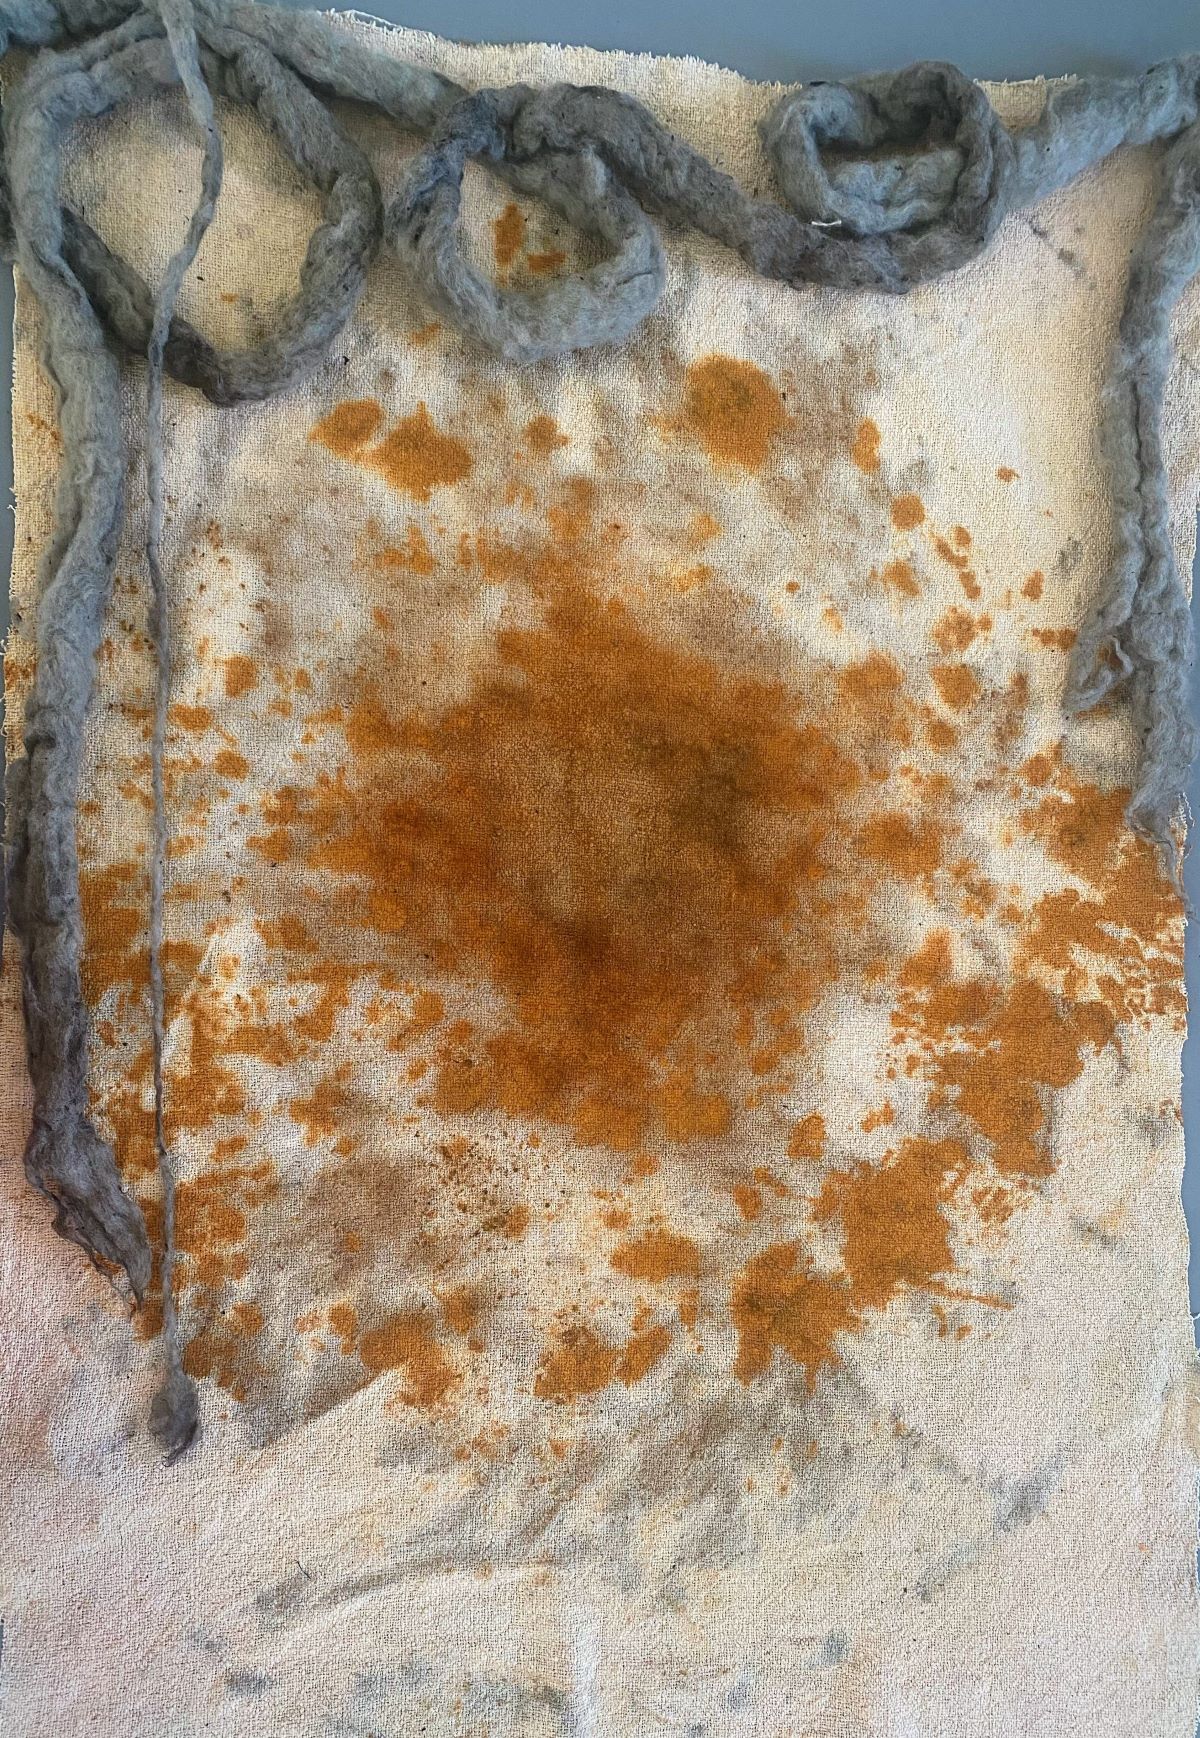 An image of some fabric dyed with rust.